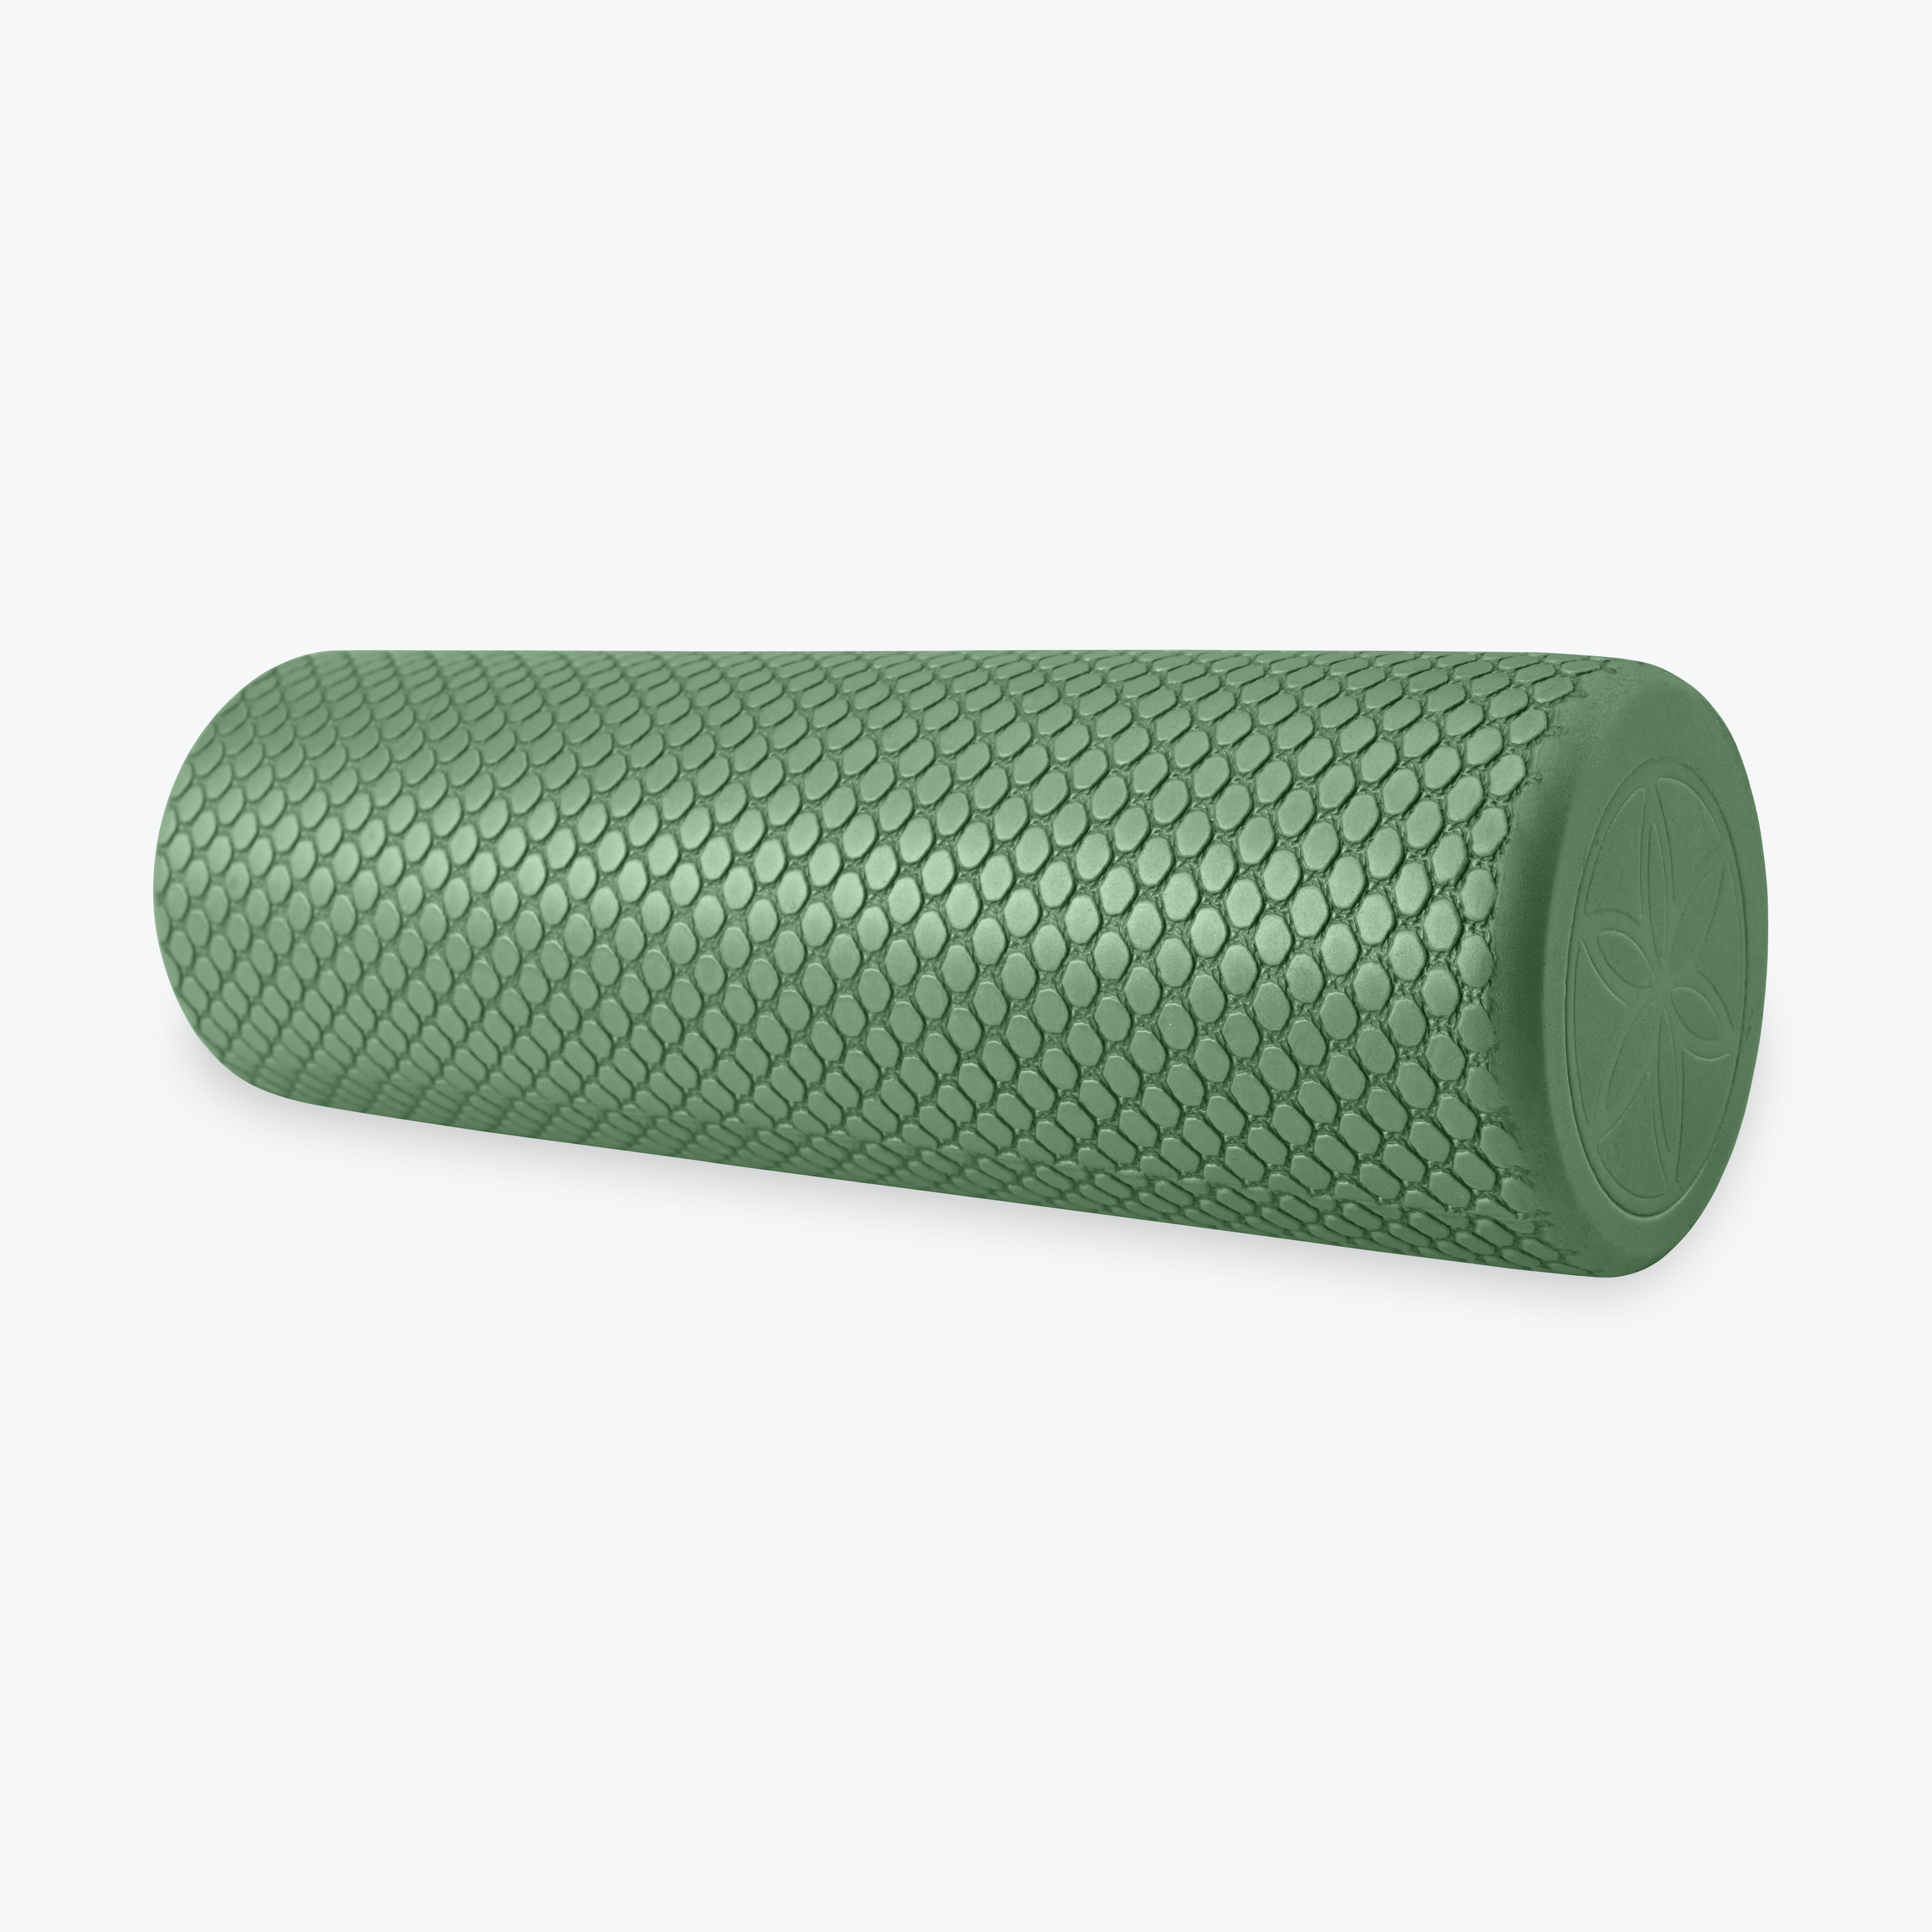 Gaiam Restore Compact Foam Roller - New Color - image 2 of 3